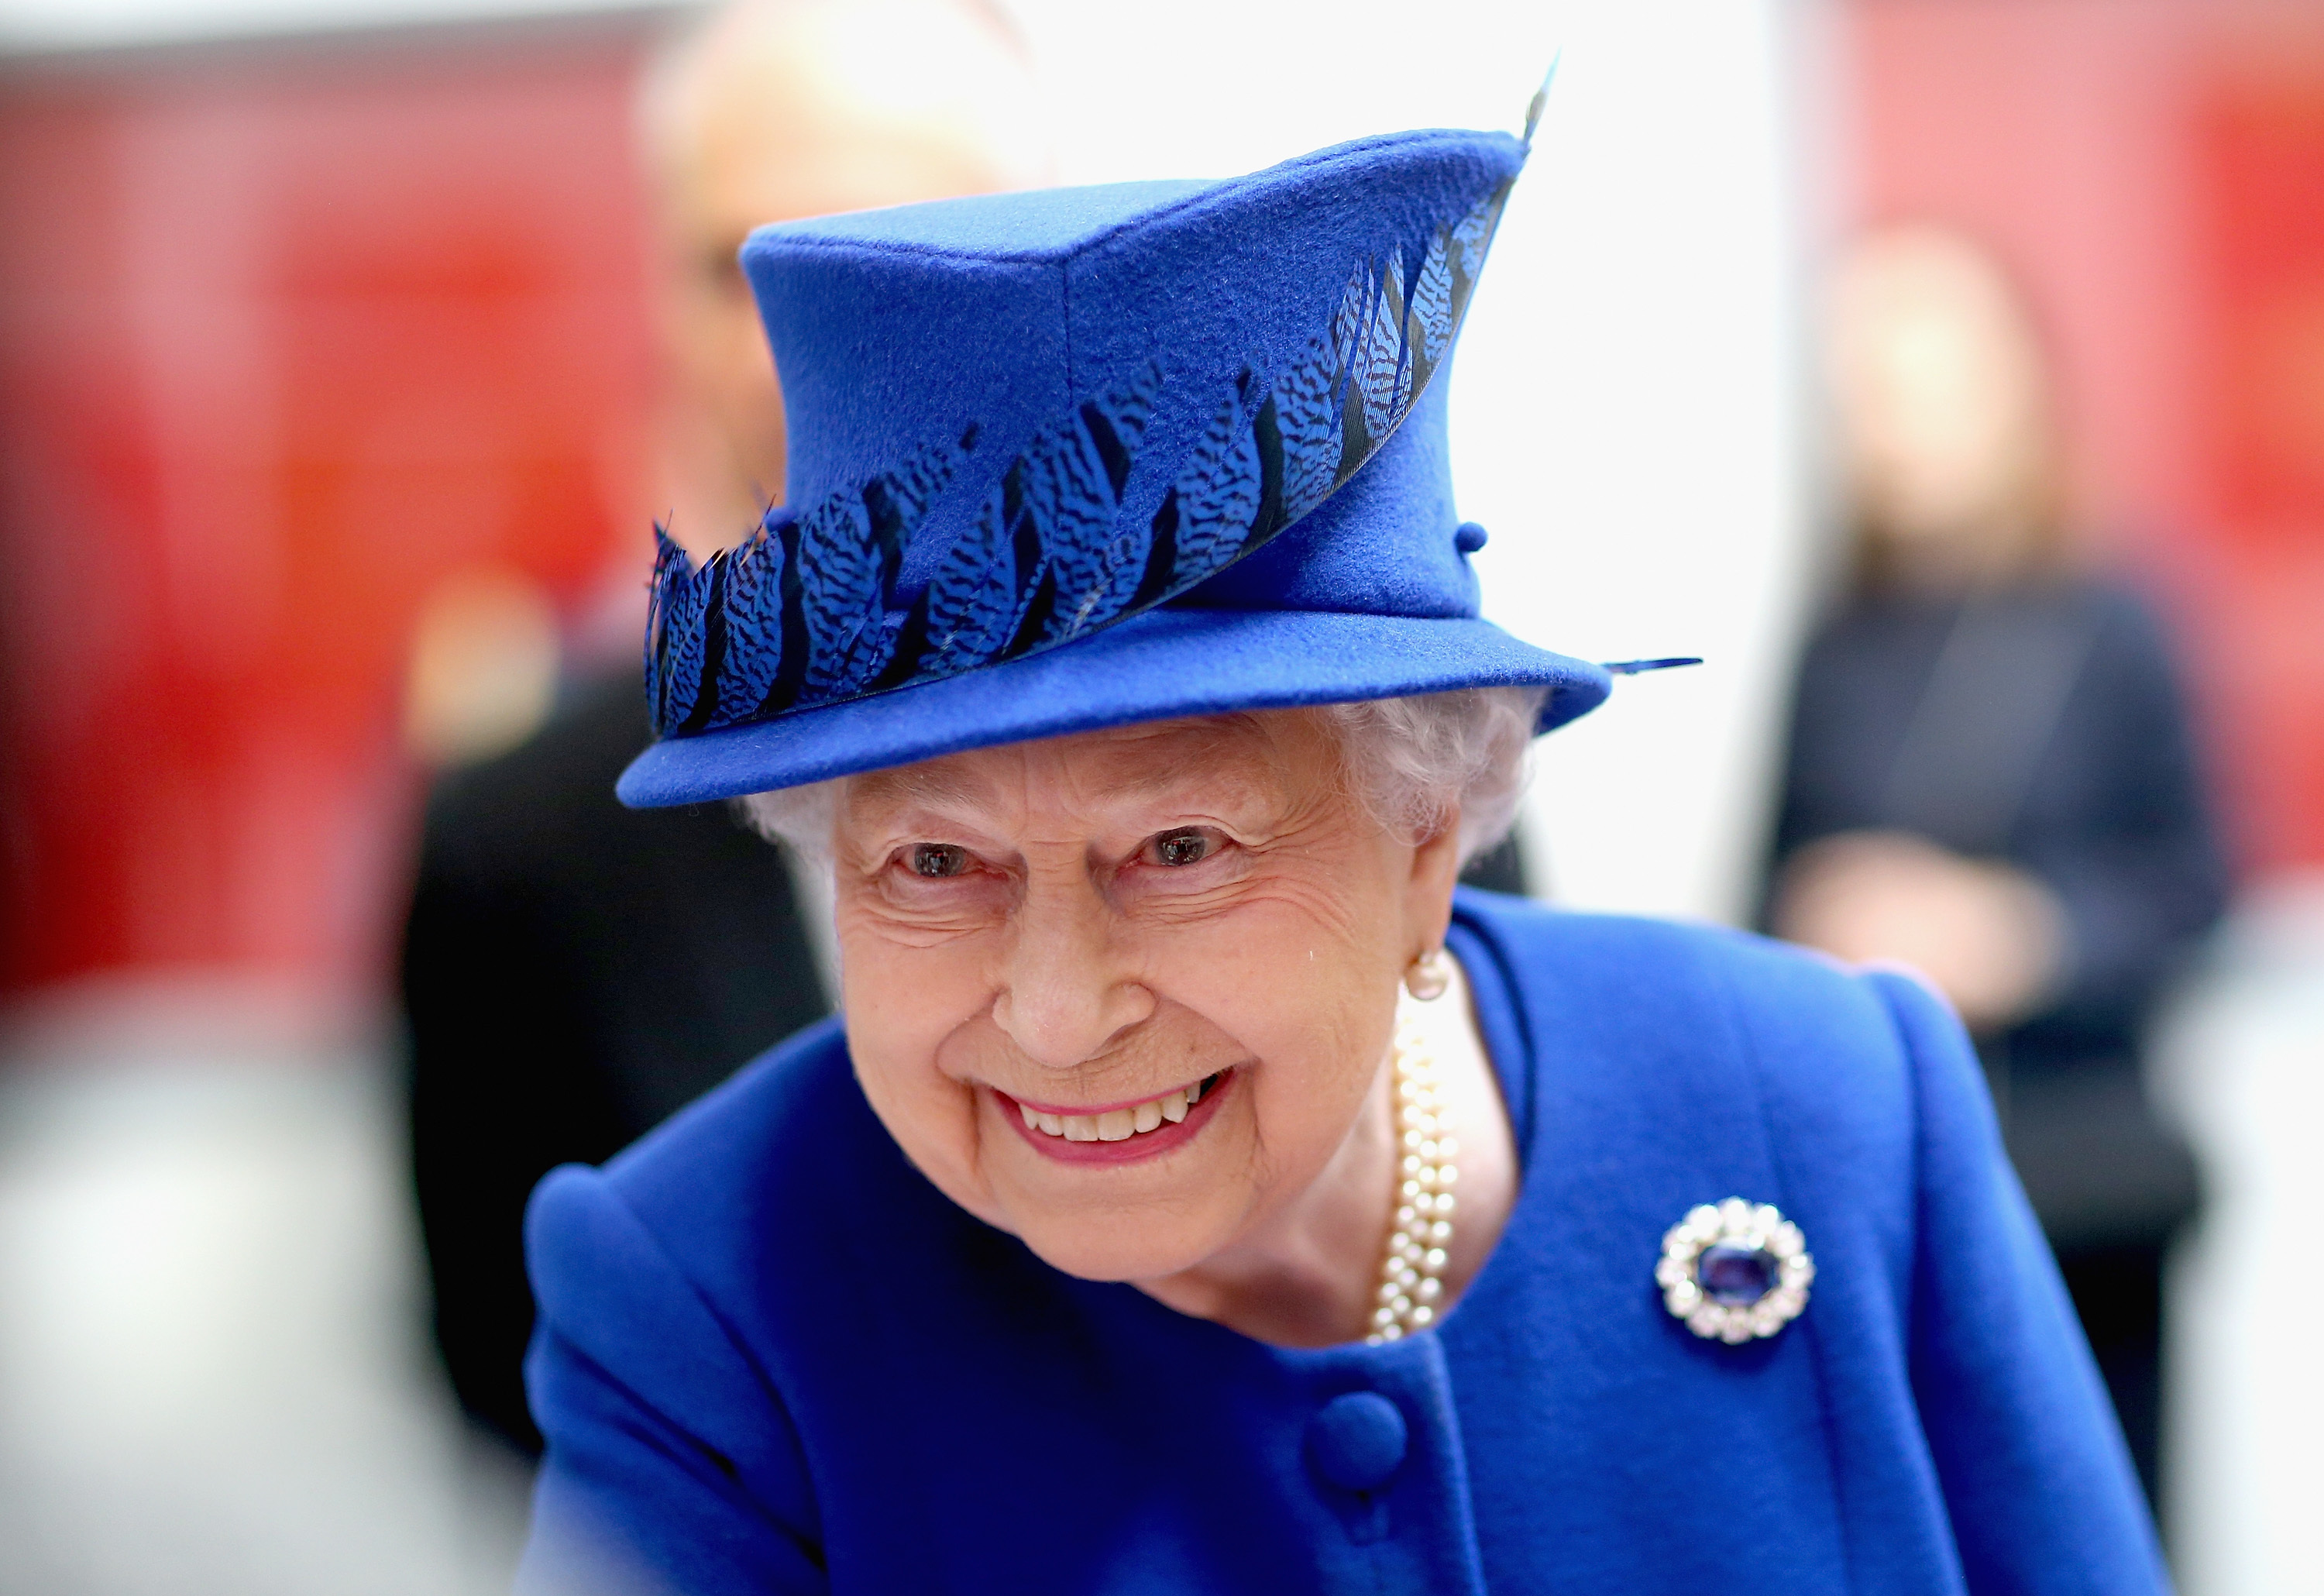 The Queen (Getty Images/Chris Jackson)